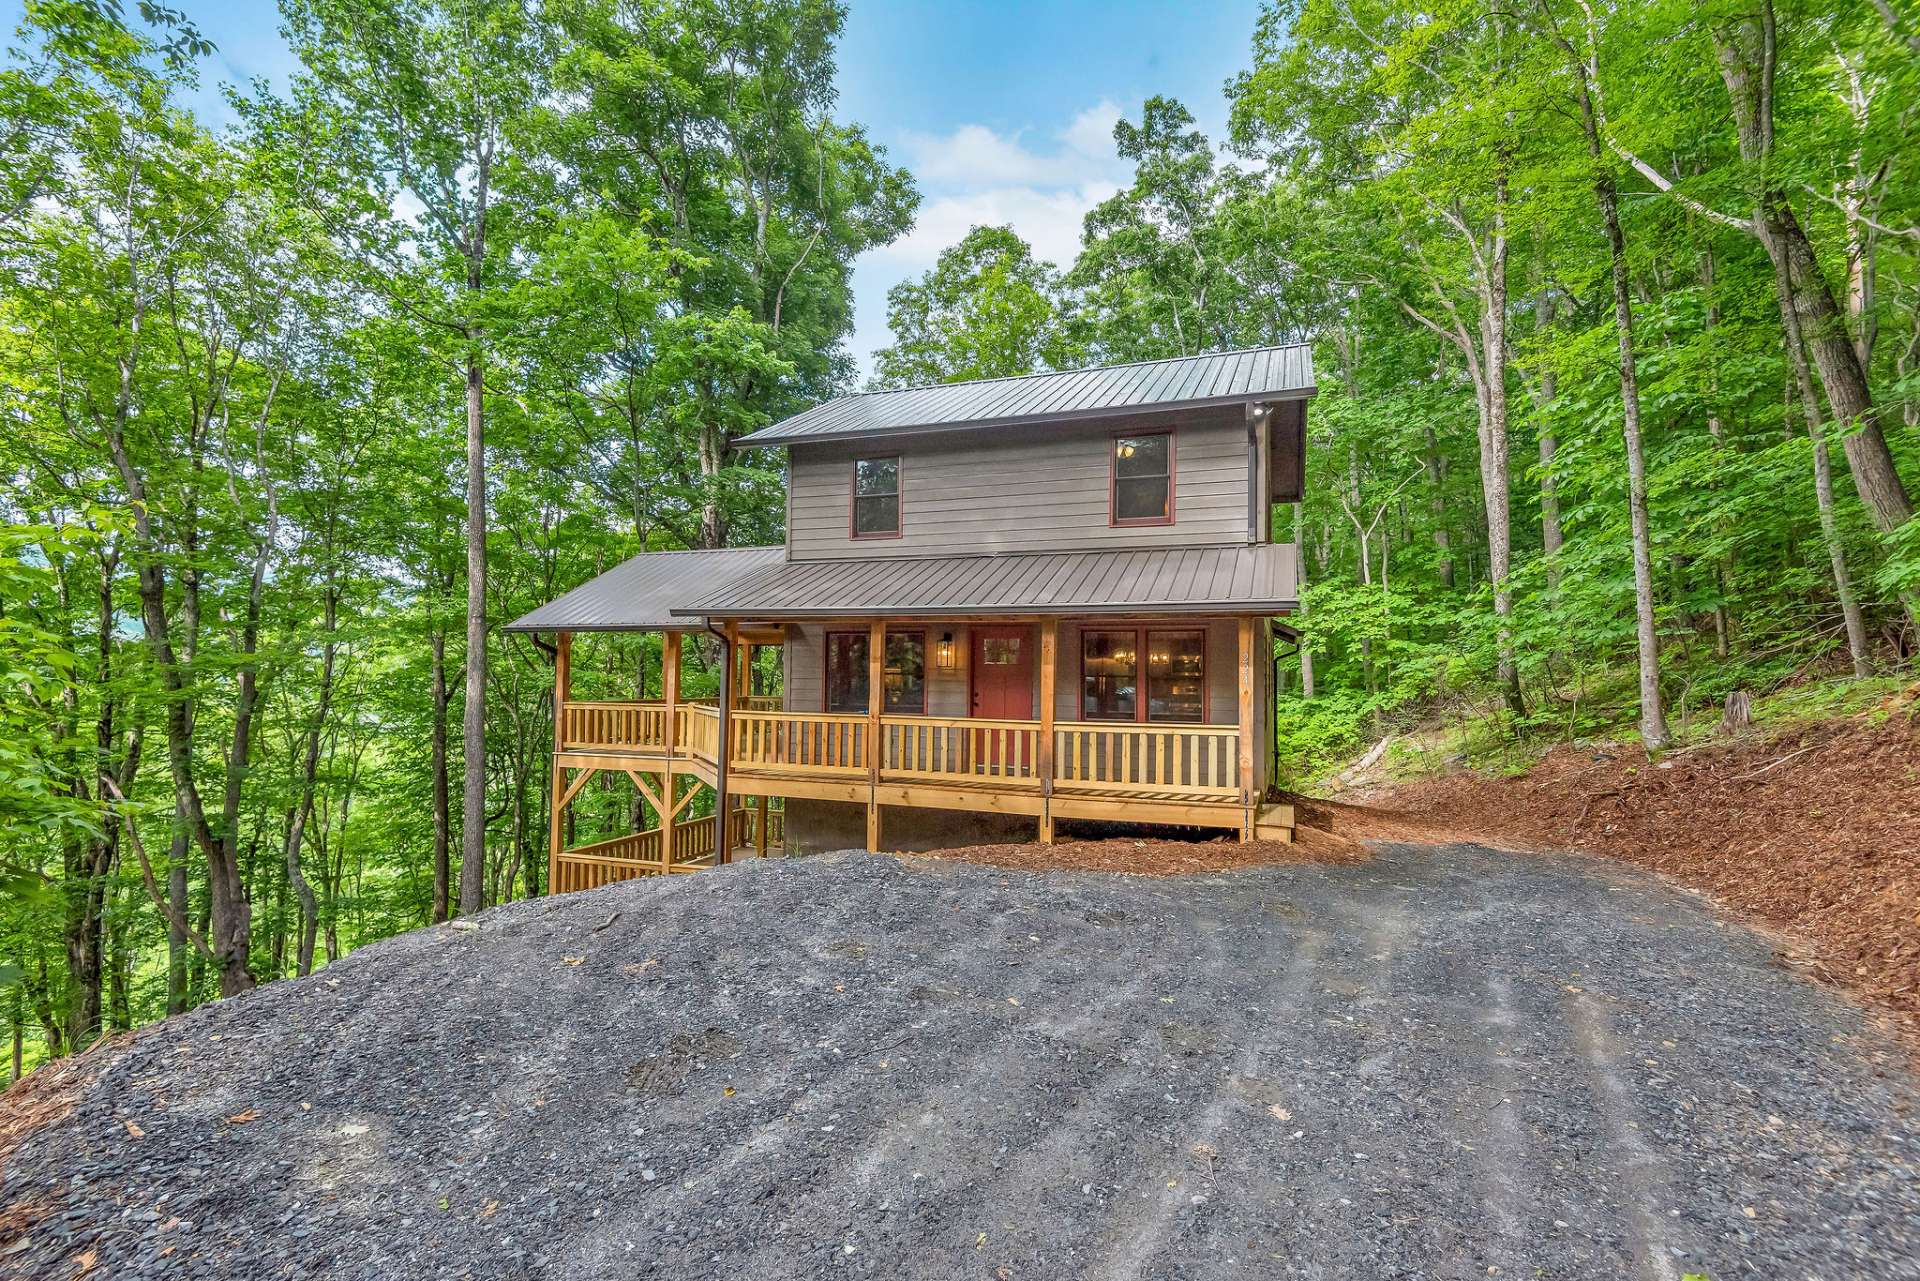 Conveniently located 10 miles from West Jefferson, 15 miles from Boone and only 6 miles to Todd Island Park for access to the New River where you can enjoy canoeing, kayaking and fishing in NC Heritage Trout Waters.